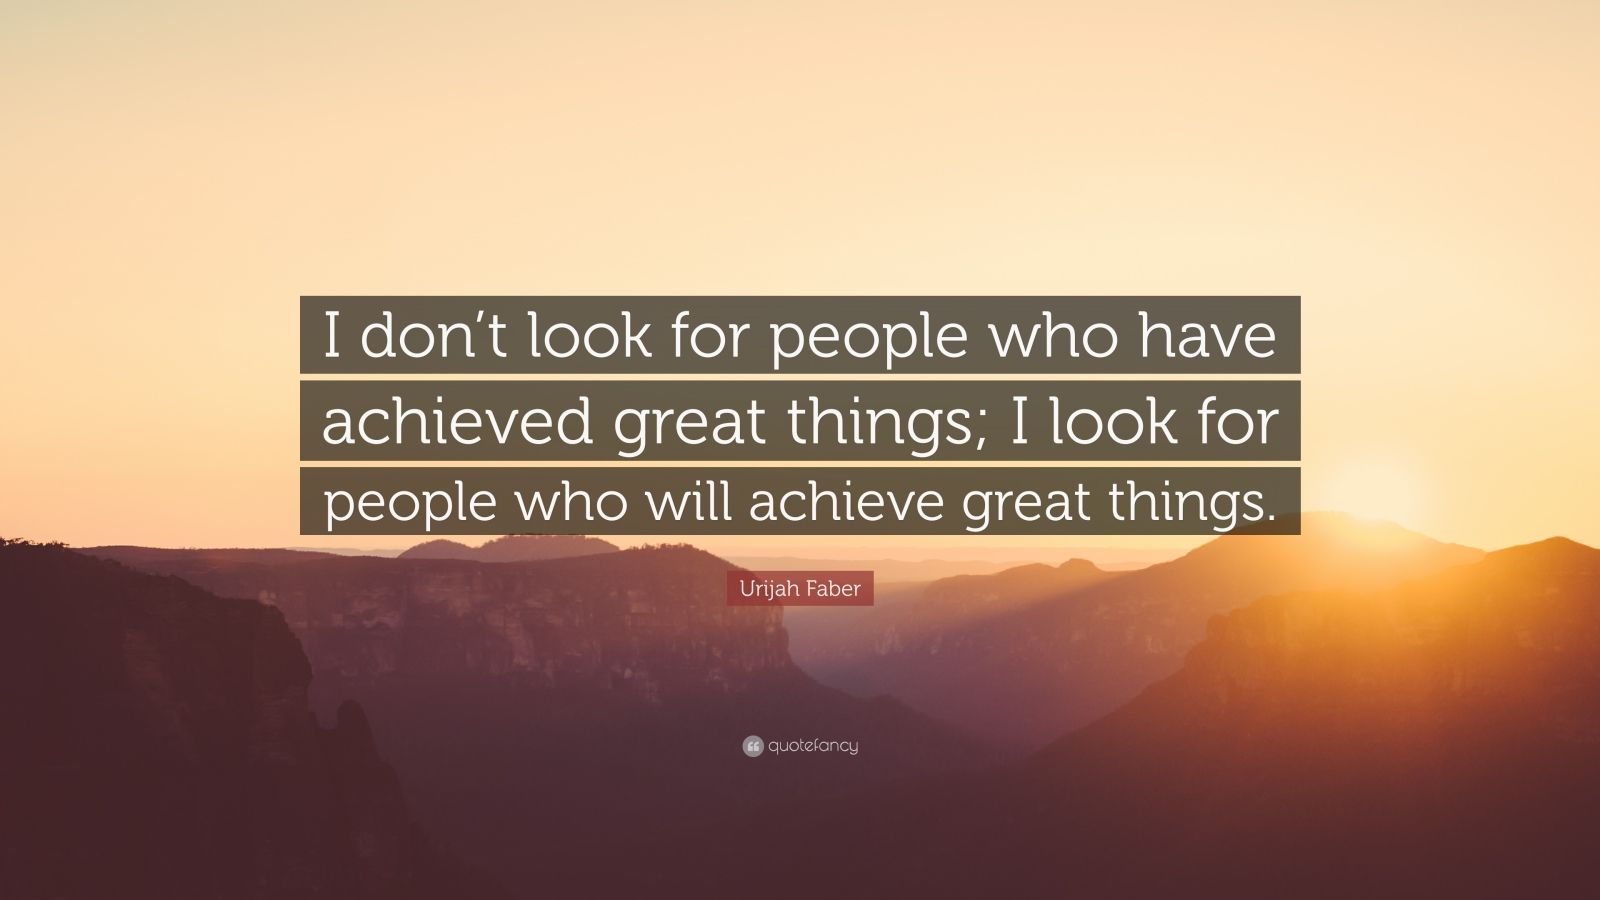 Urijah Faber Quote: “I don’t look for people who have achieved great ...